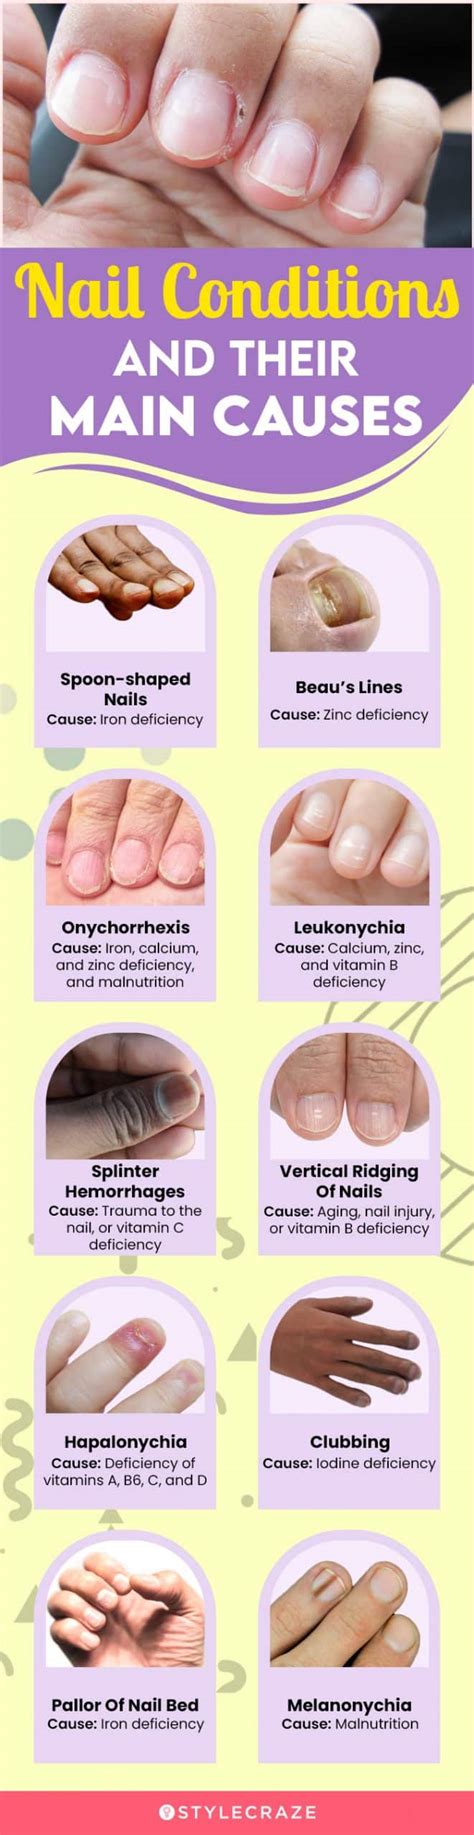 Effects Of Nutrient Deficiency On The Nails What Do They Indicate